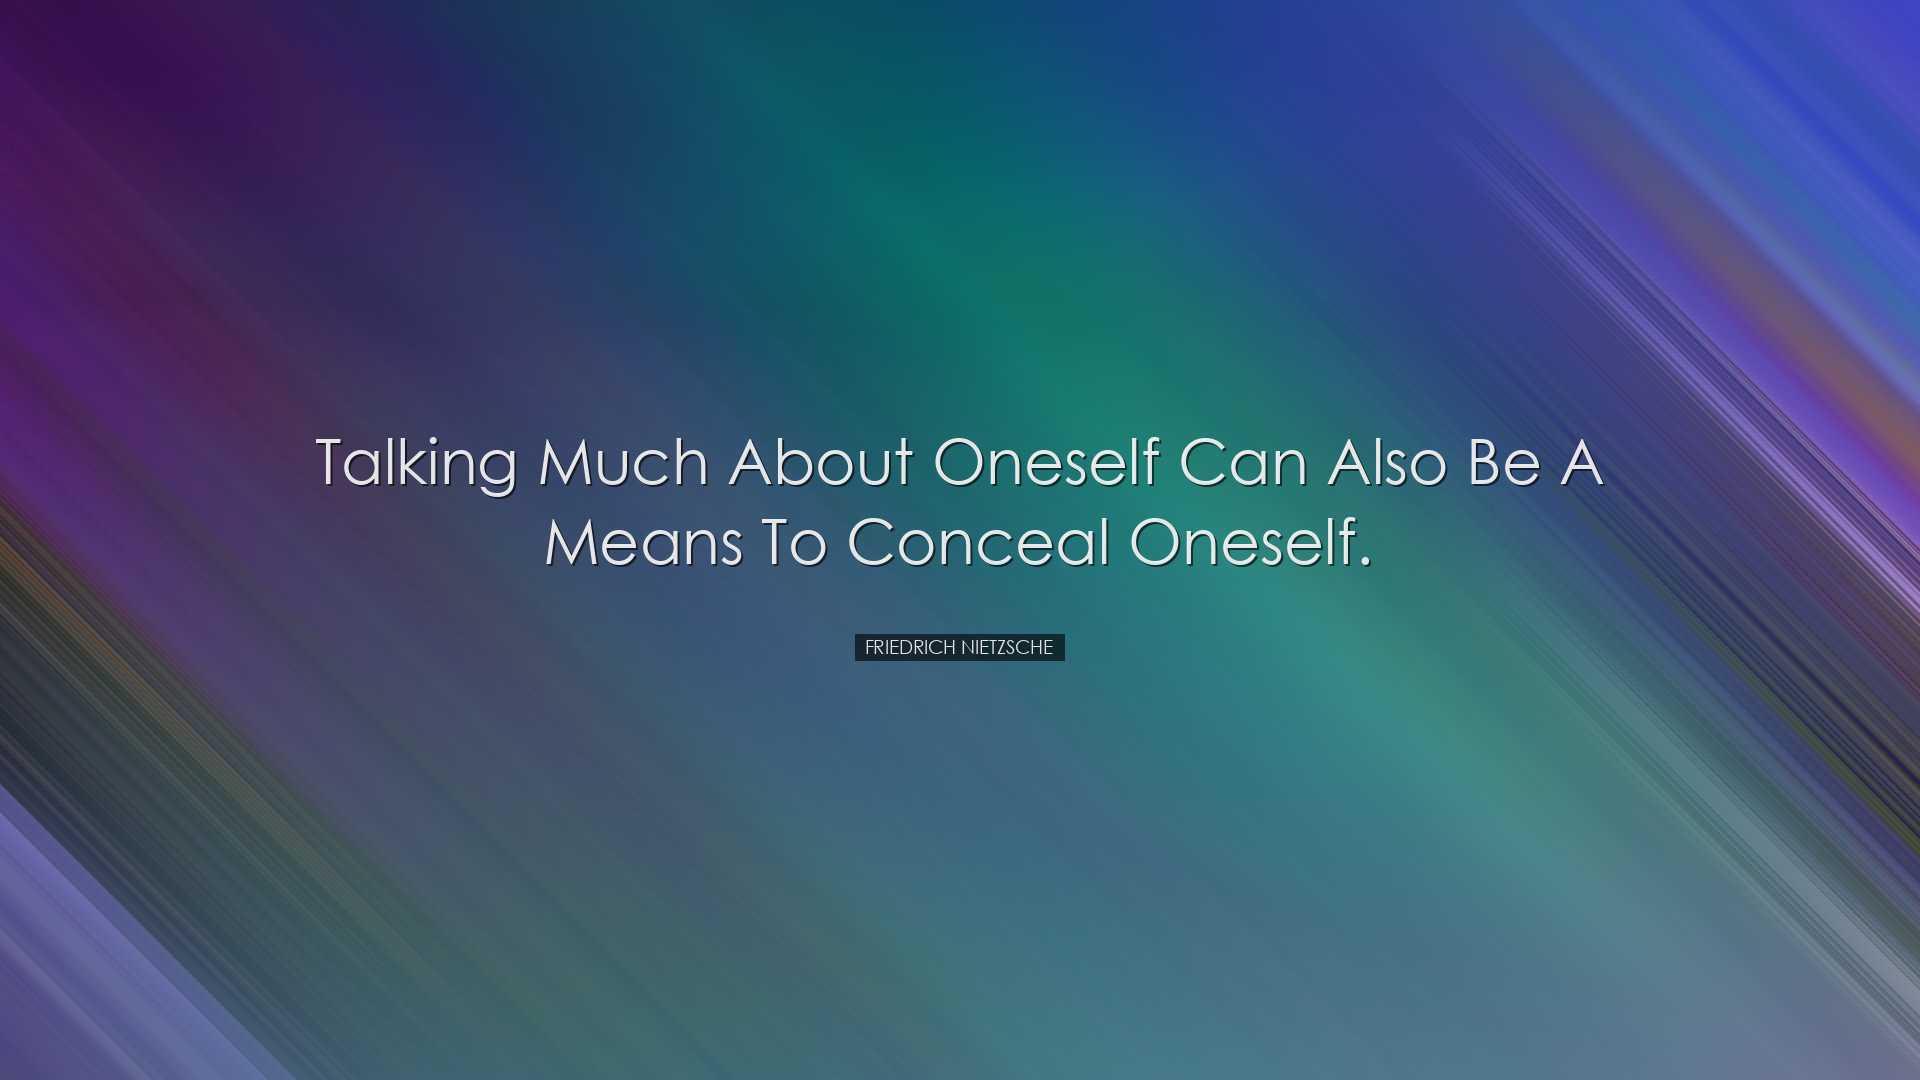 Talking much about oneself can also be a means to conceal oneself.